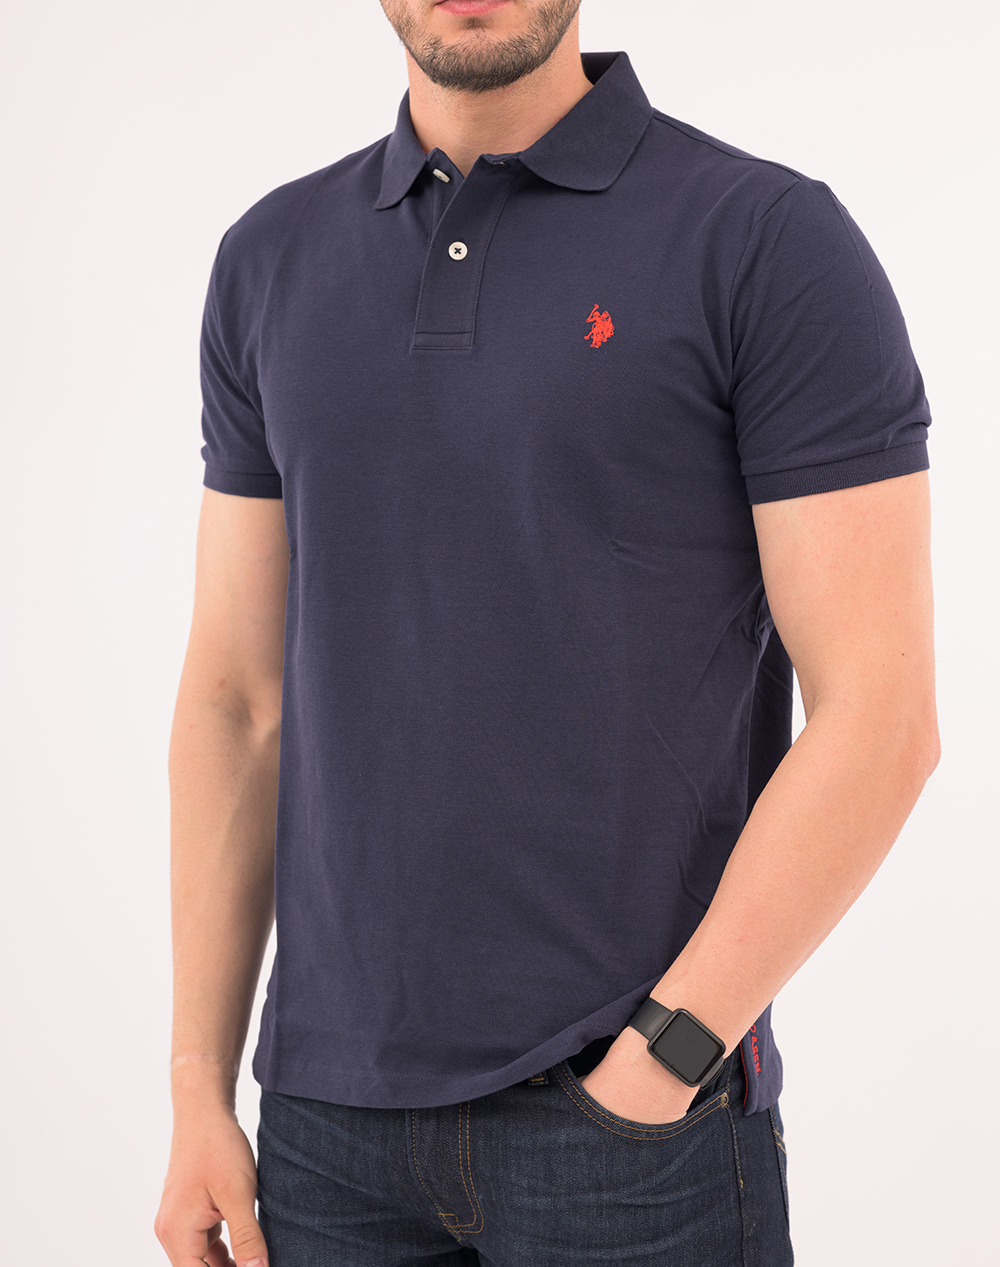 US POLO ASSN KING 41029 EHPD POLO PACK OF 400 ΜΠΛΟΥΖΑ ΑΝΔΡΙΚΟ 6735541029P400-179 DarkBlue